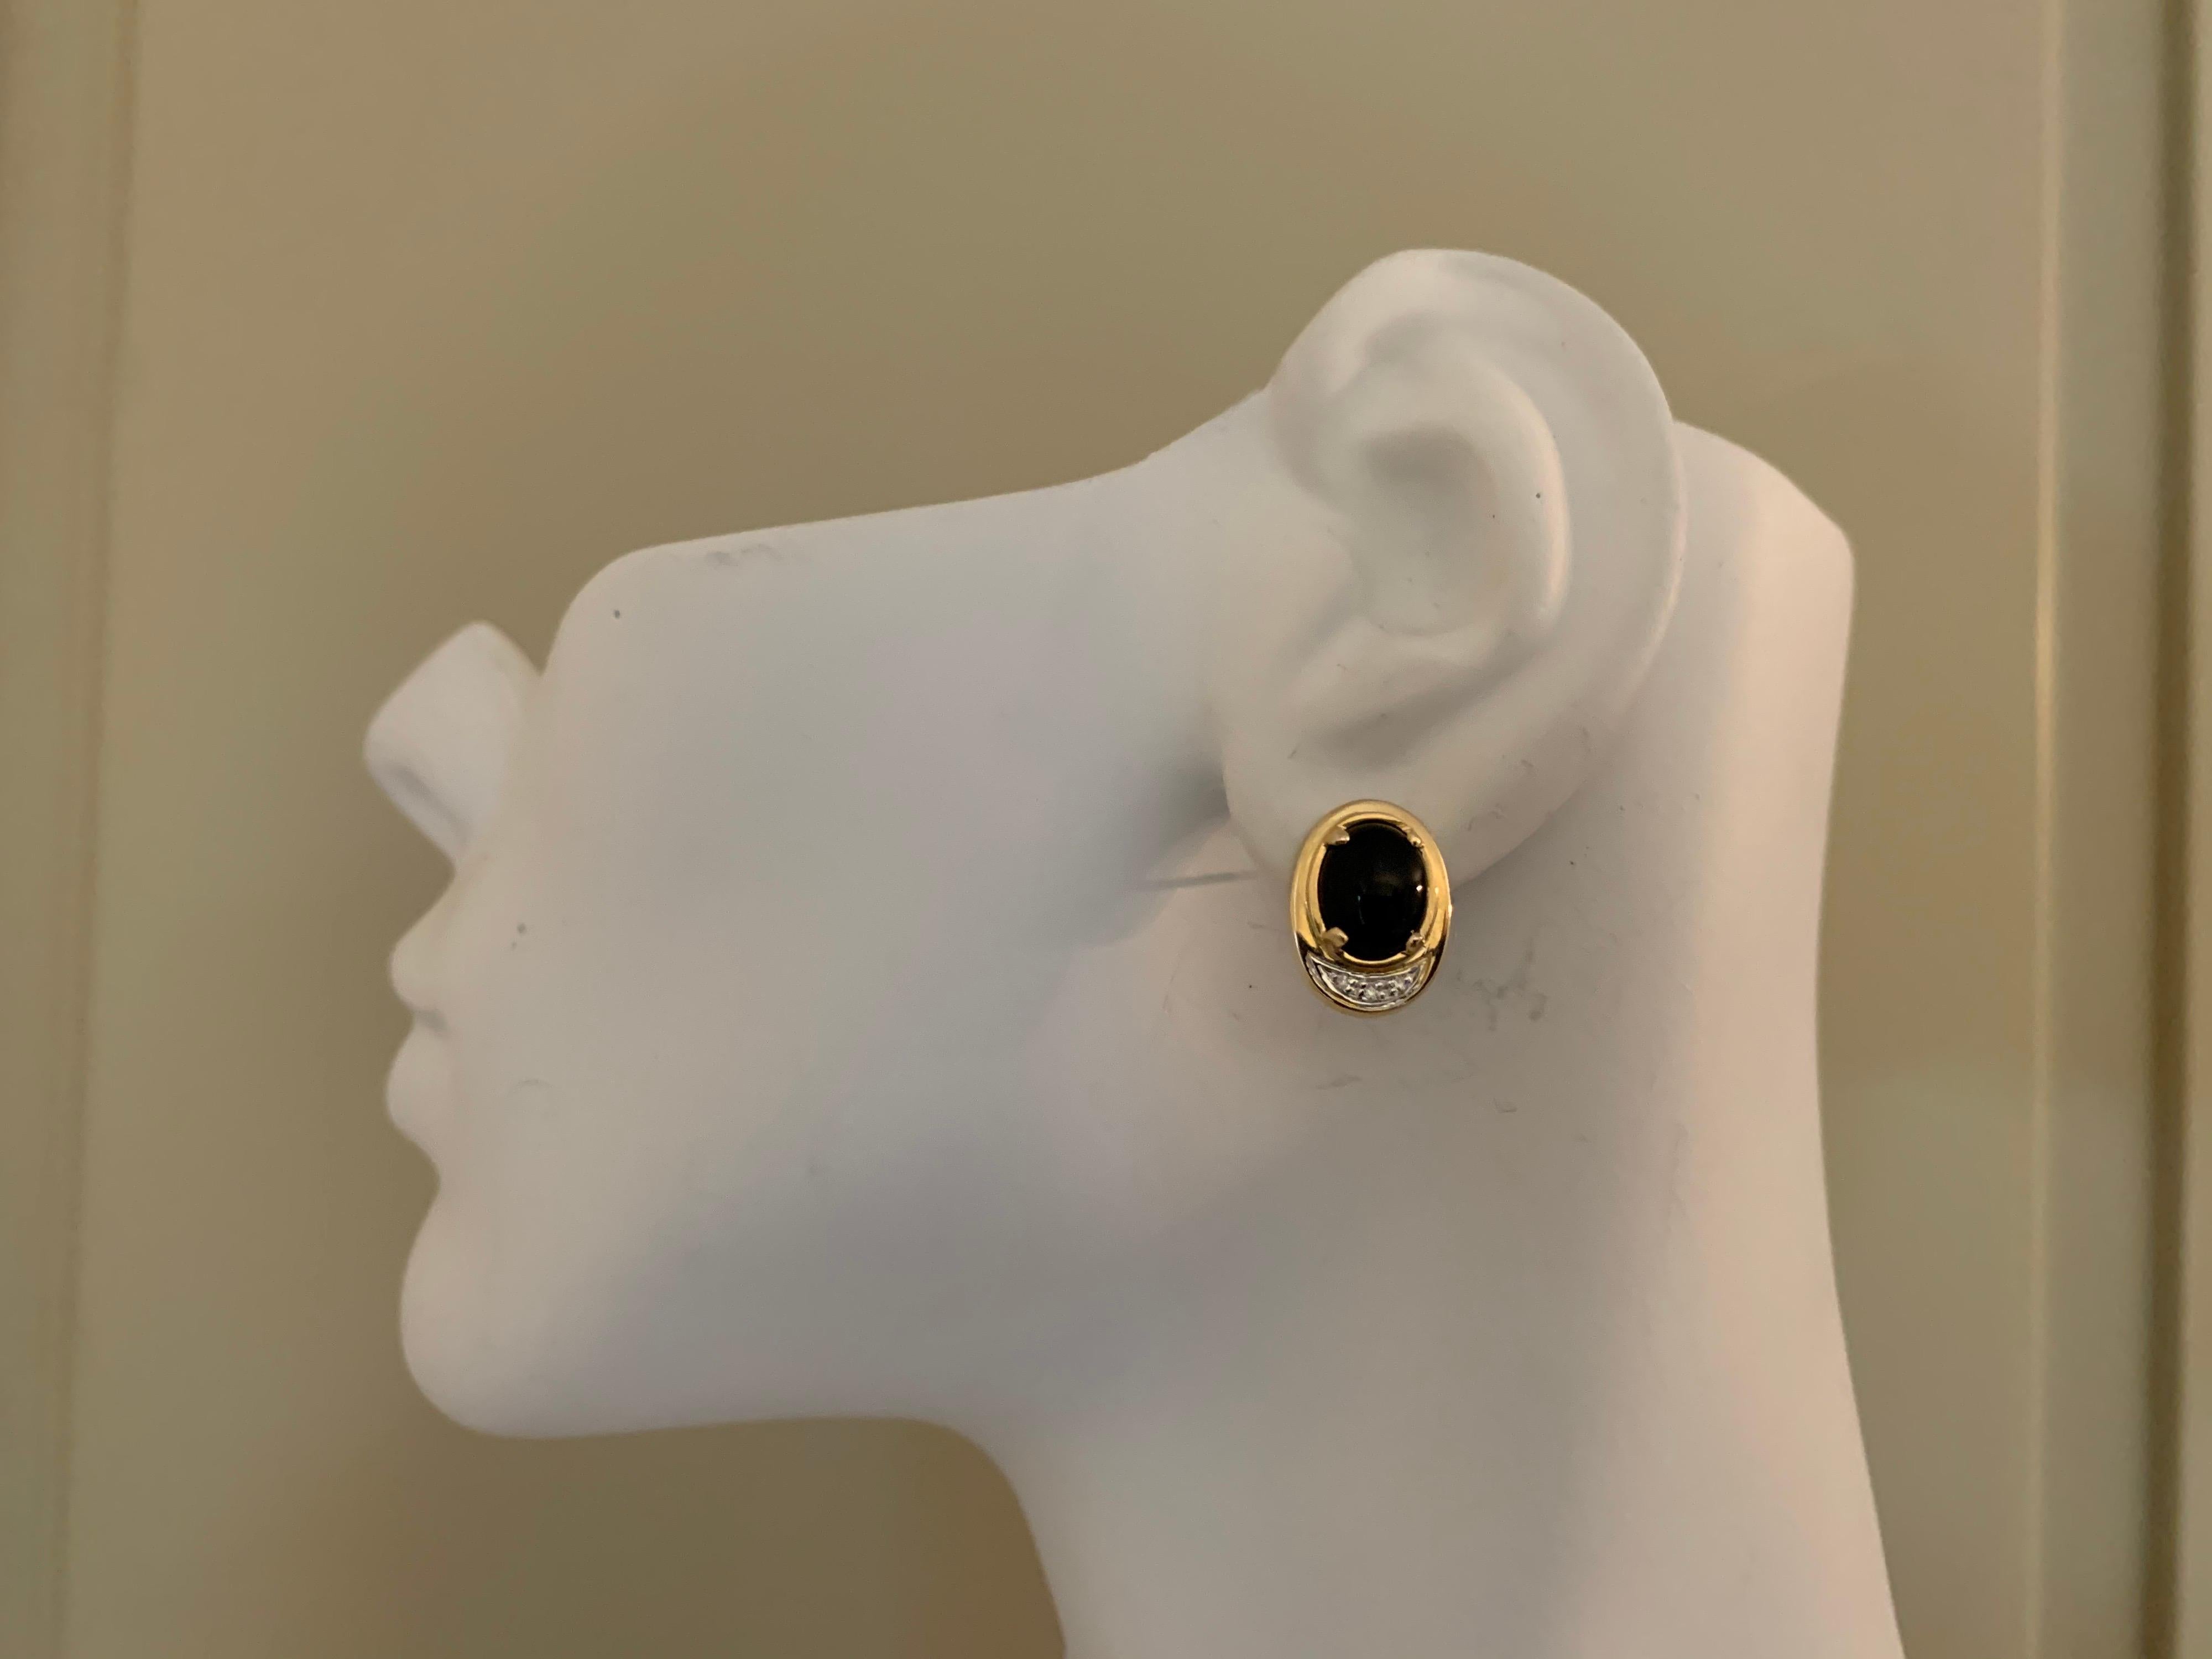 Retro 14k Yellow Gold 4.5 Gram Natural Oval Onyx & Diamond Earrings Circa 1960. 

The piece is set with 6 single cut diamonds weighing approximately .05 carats.